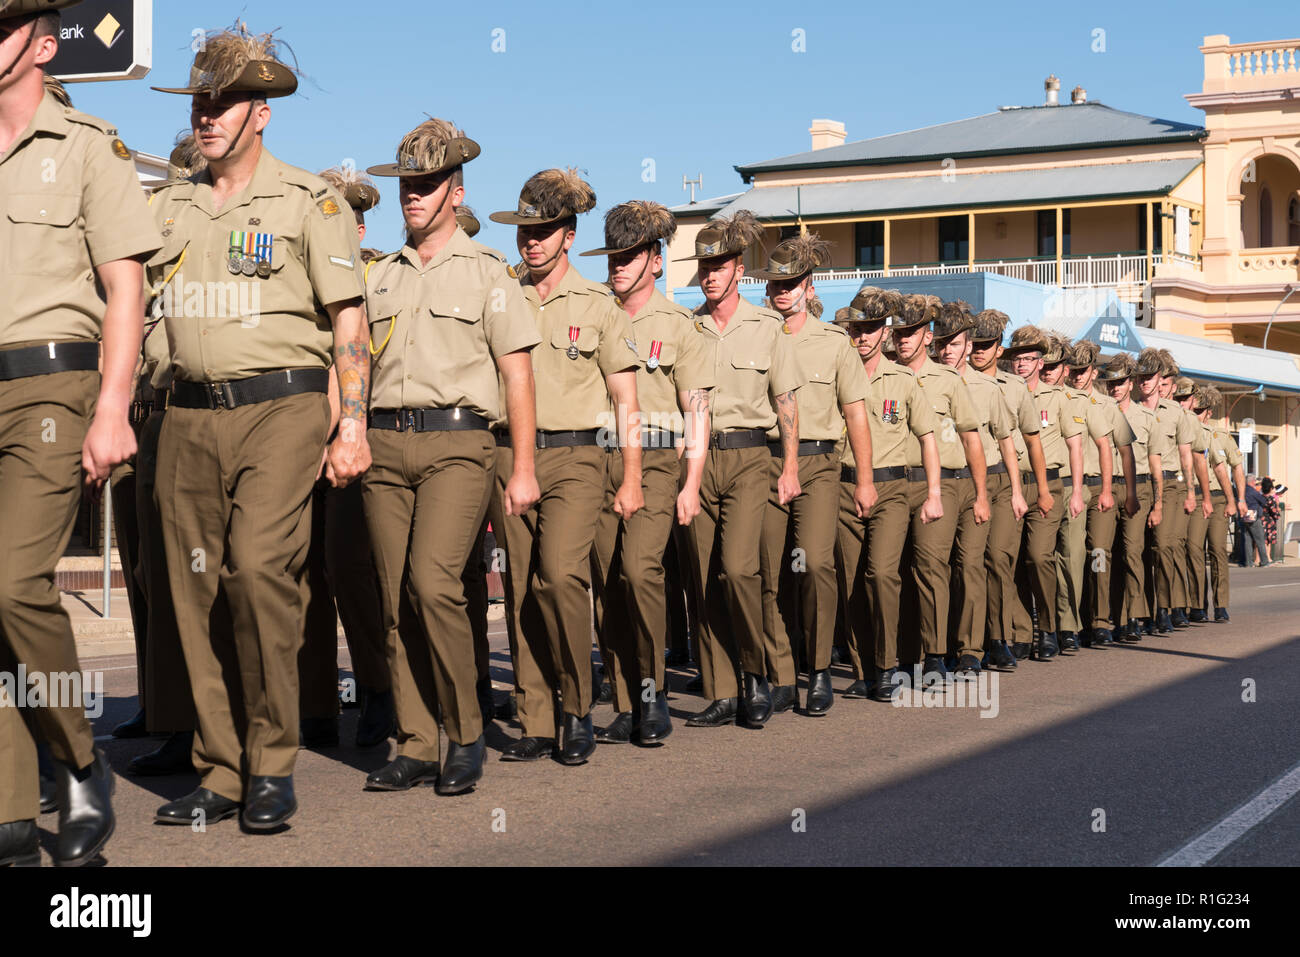 Soldiers marching on Anzac Day in Charters Towers, Queensland, Australia Stock Photo